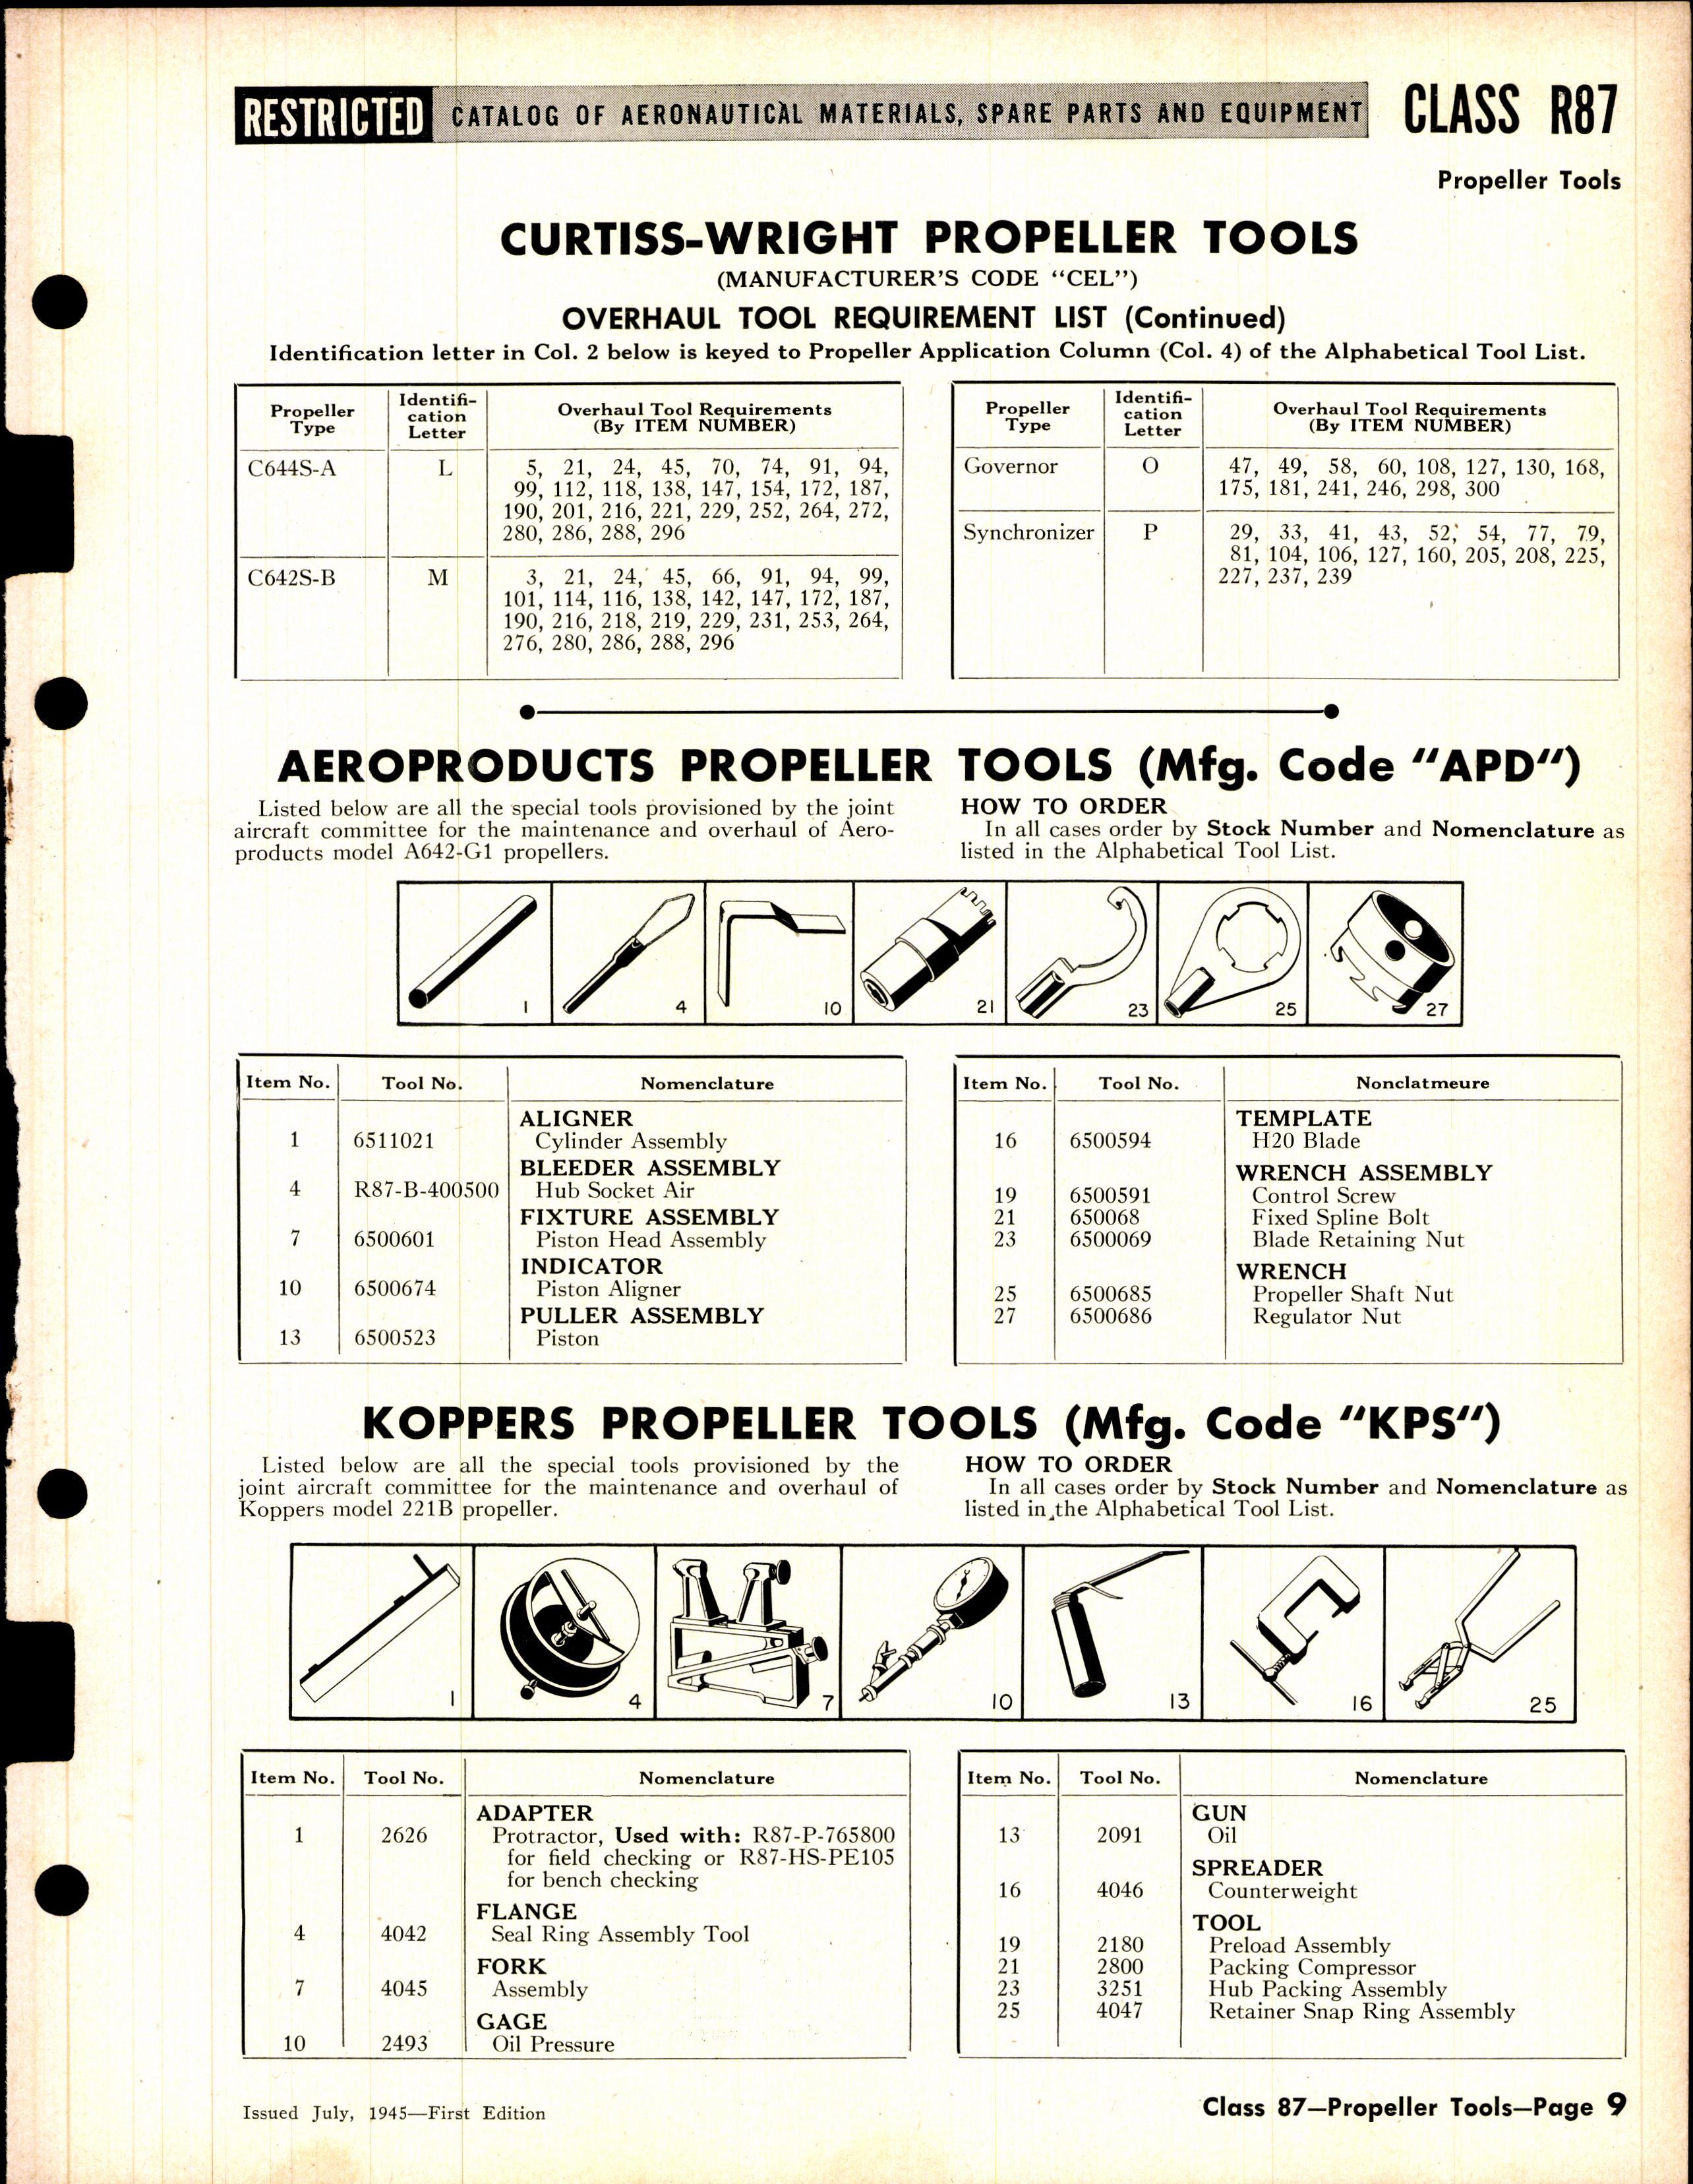 Sample page 9 from AirCorps Library document: Special Tools for Aeroproducts Curtiss-Wright Hamilton Standard and Koppers Propellers